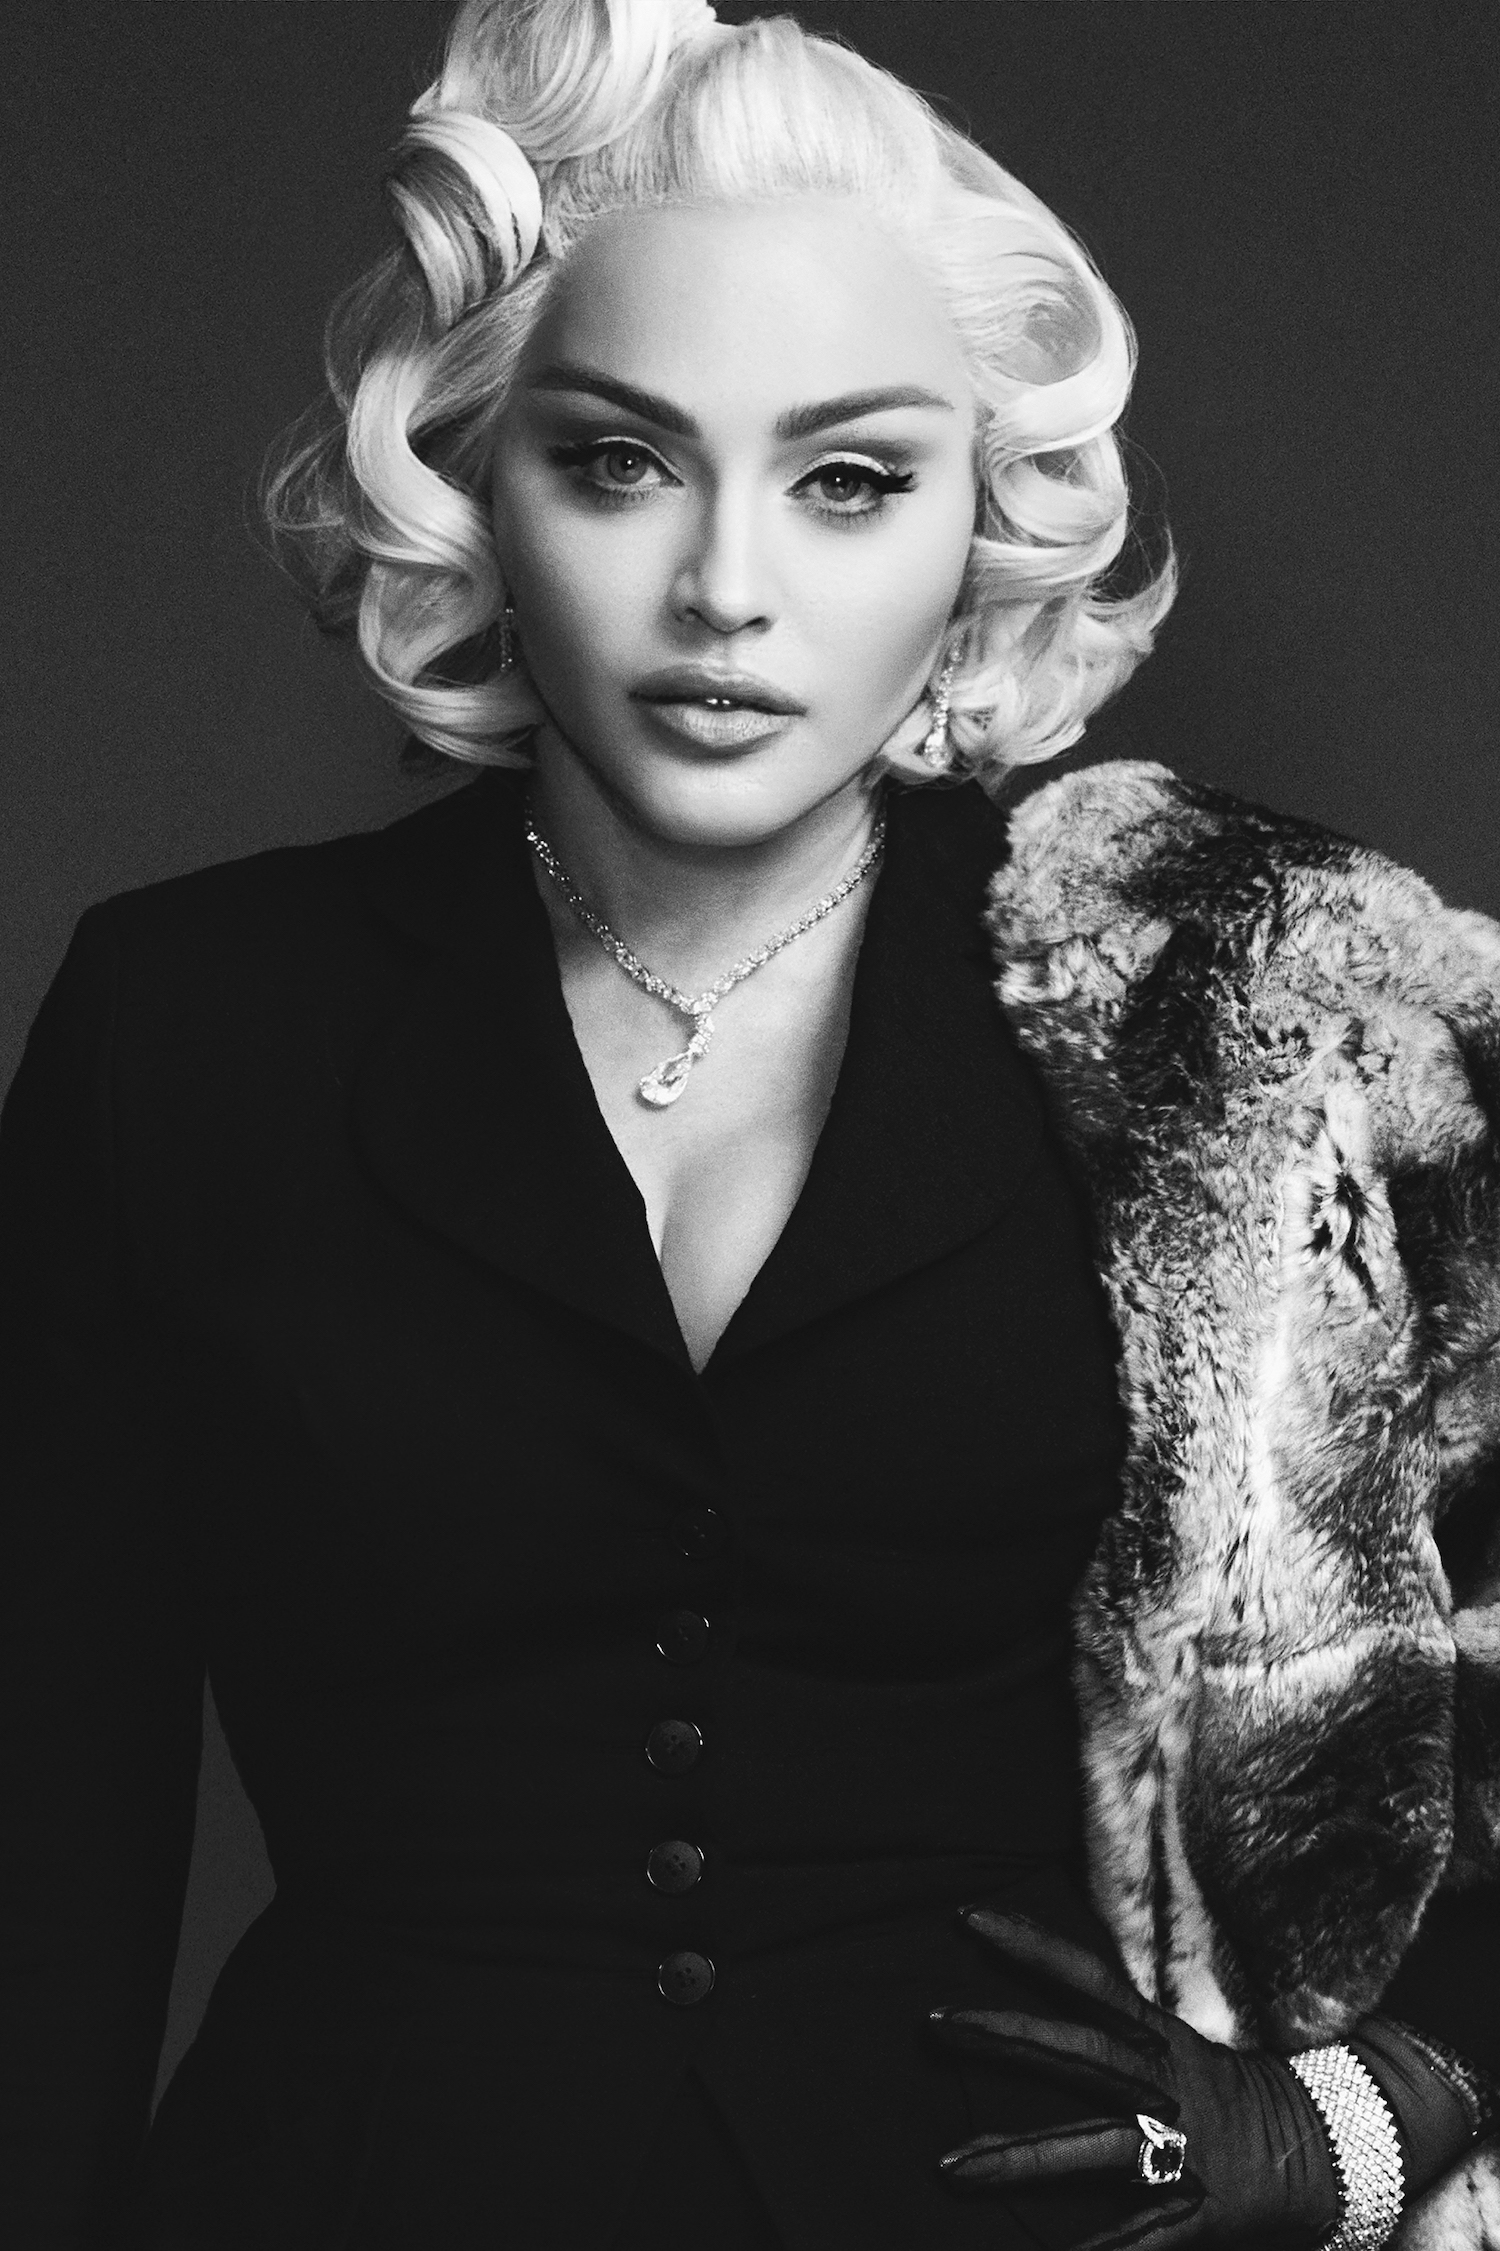  Madonna wears earrings, necklace, bracelet, rings Bucherer Fine Jewellery, Suit jacket and stole, vintage from The Paper Bag Princess Gloves Dita Von Teese for Gaspar // On eyes: Chanel OMBRE PREMIÈRE LAQUE Longwear Liquid Eyeshadow